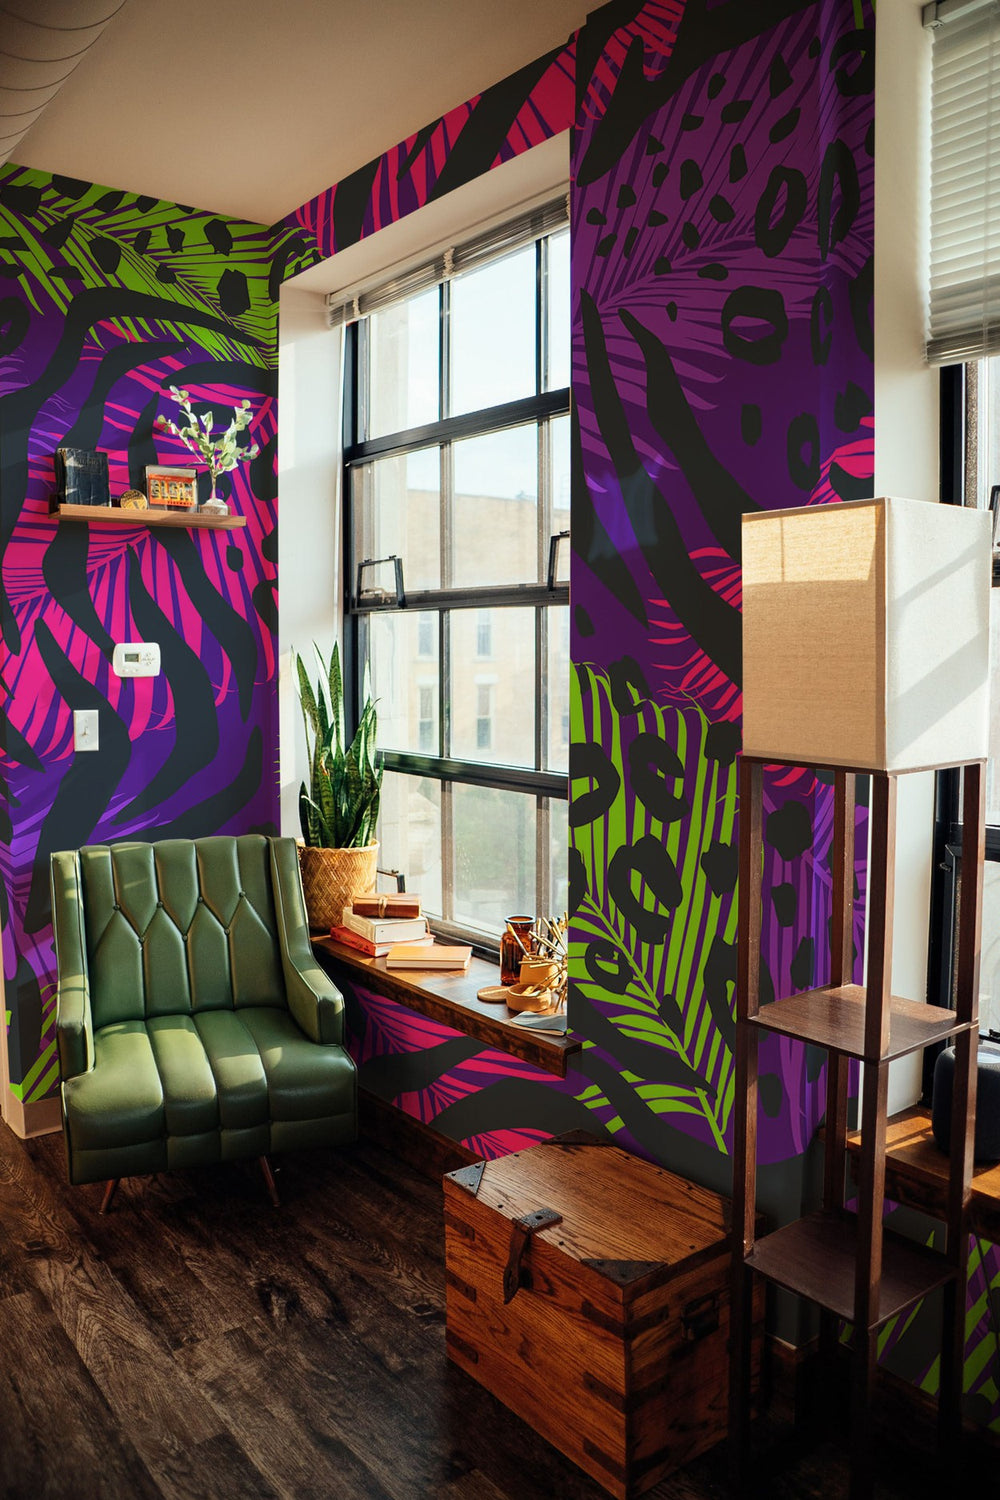 Stylish interior of a living room with a vibrant purple and green wall mural, green sofa, wooden furniture, and houseplants near a window.